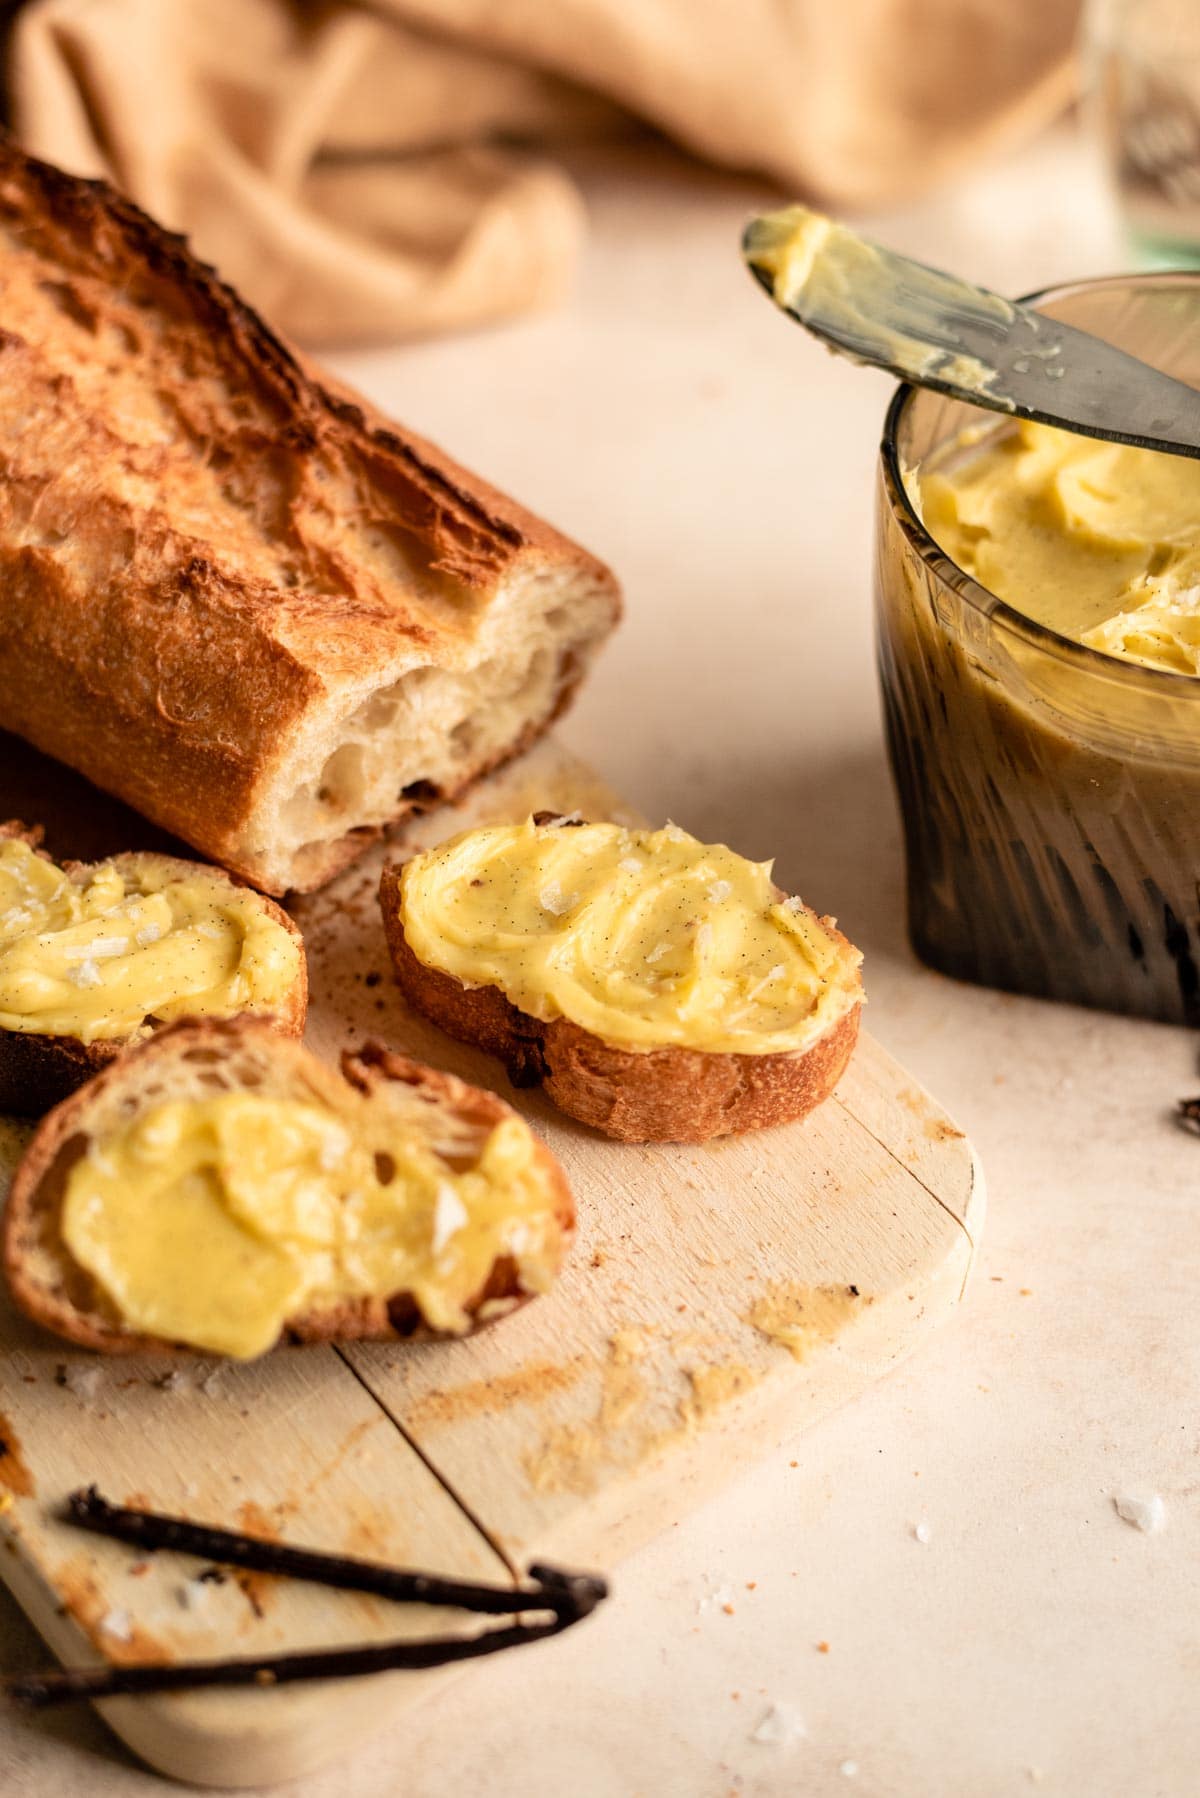 A glass filled with vanilla butter, with a sliced baguette on a cutting board with butter smeared on the slices.